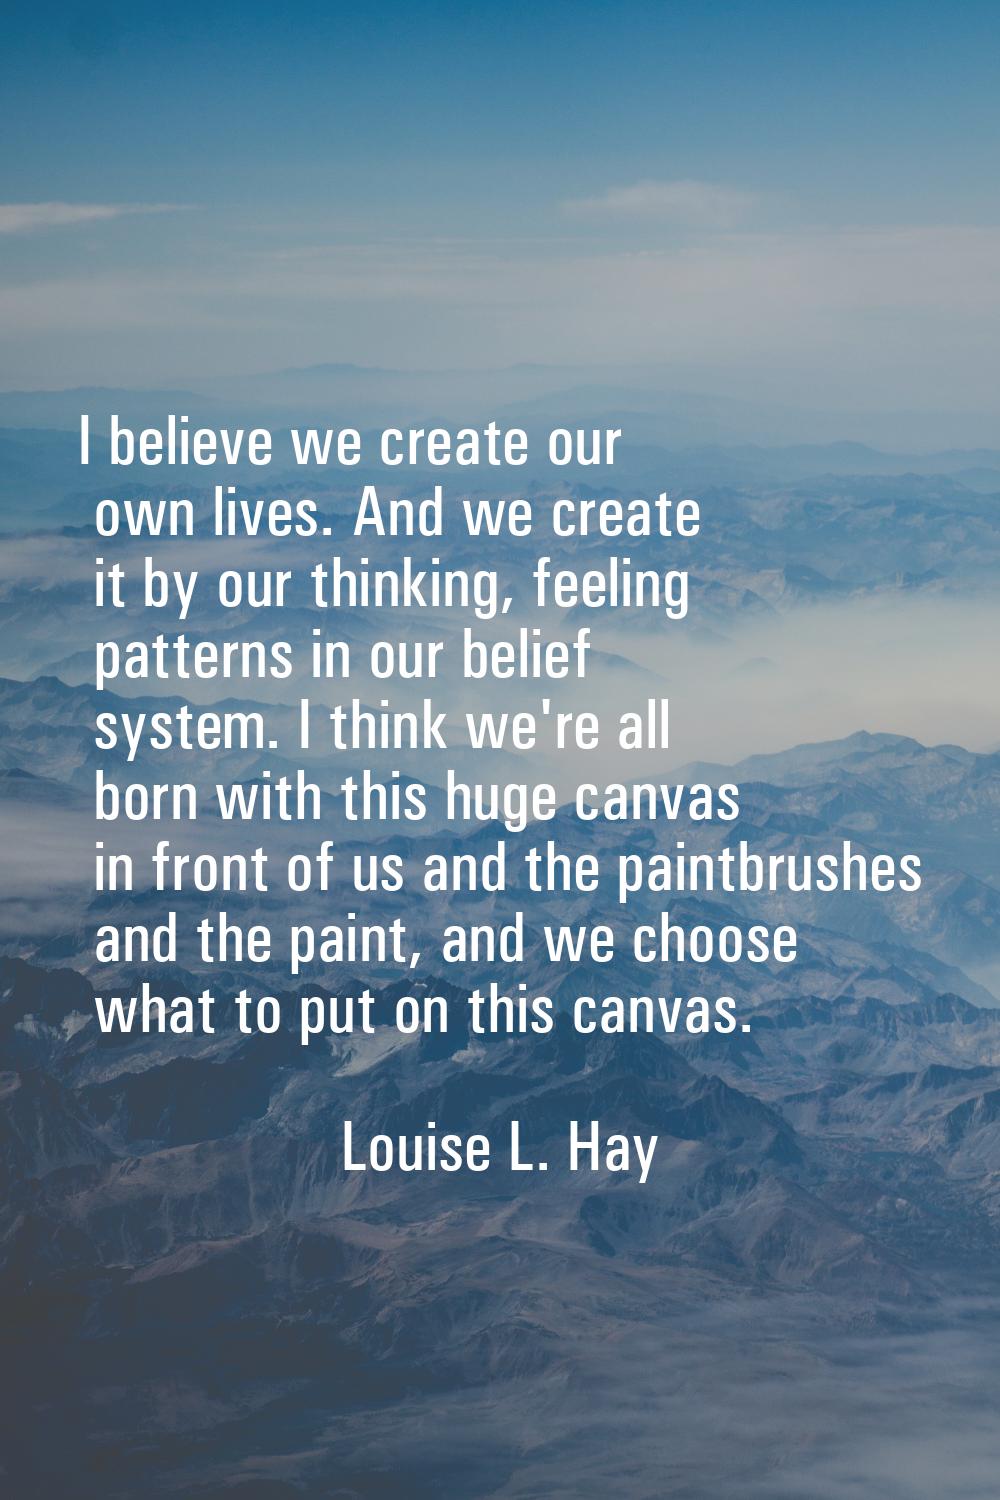 I believe we create our own lives. And we create it by our thinking, feeling patterns in our belief